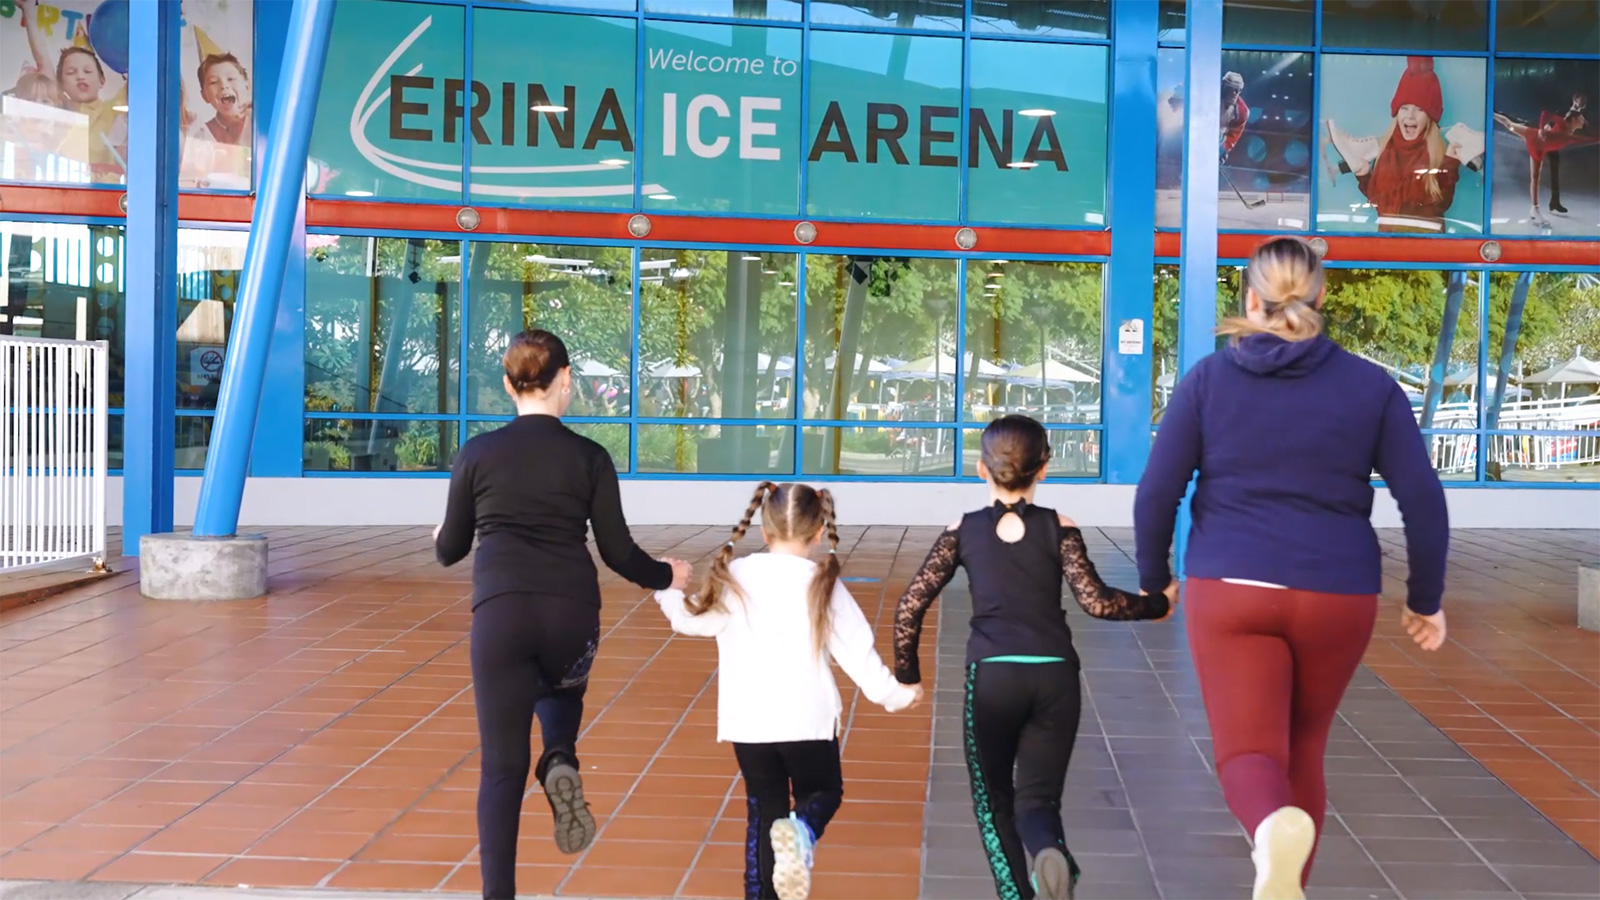 YOU WANT MORE TIME ON ICE – WE HAVE IT